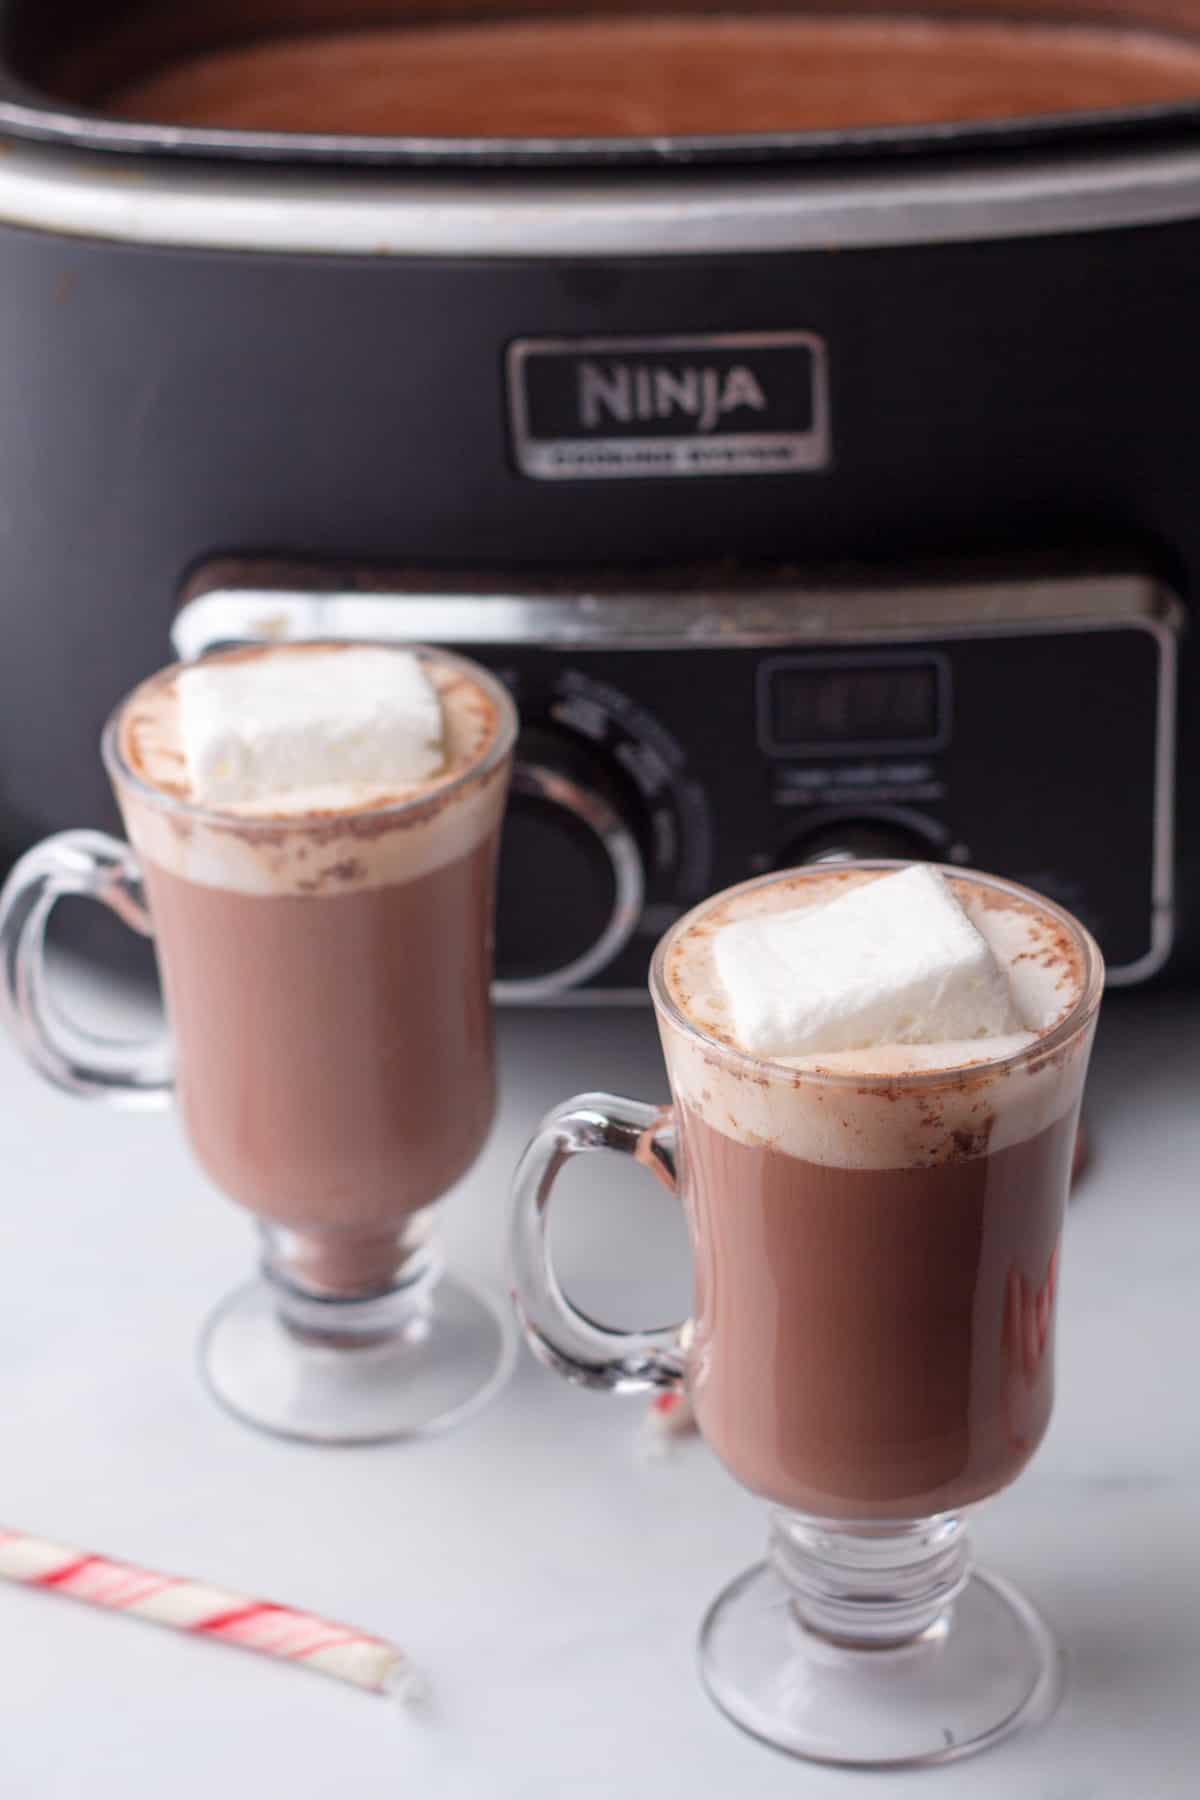 Two cups of hot chocolate in front of a crock pot.